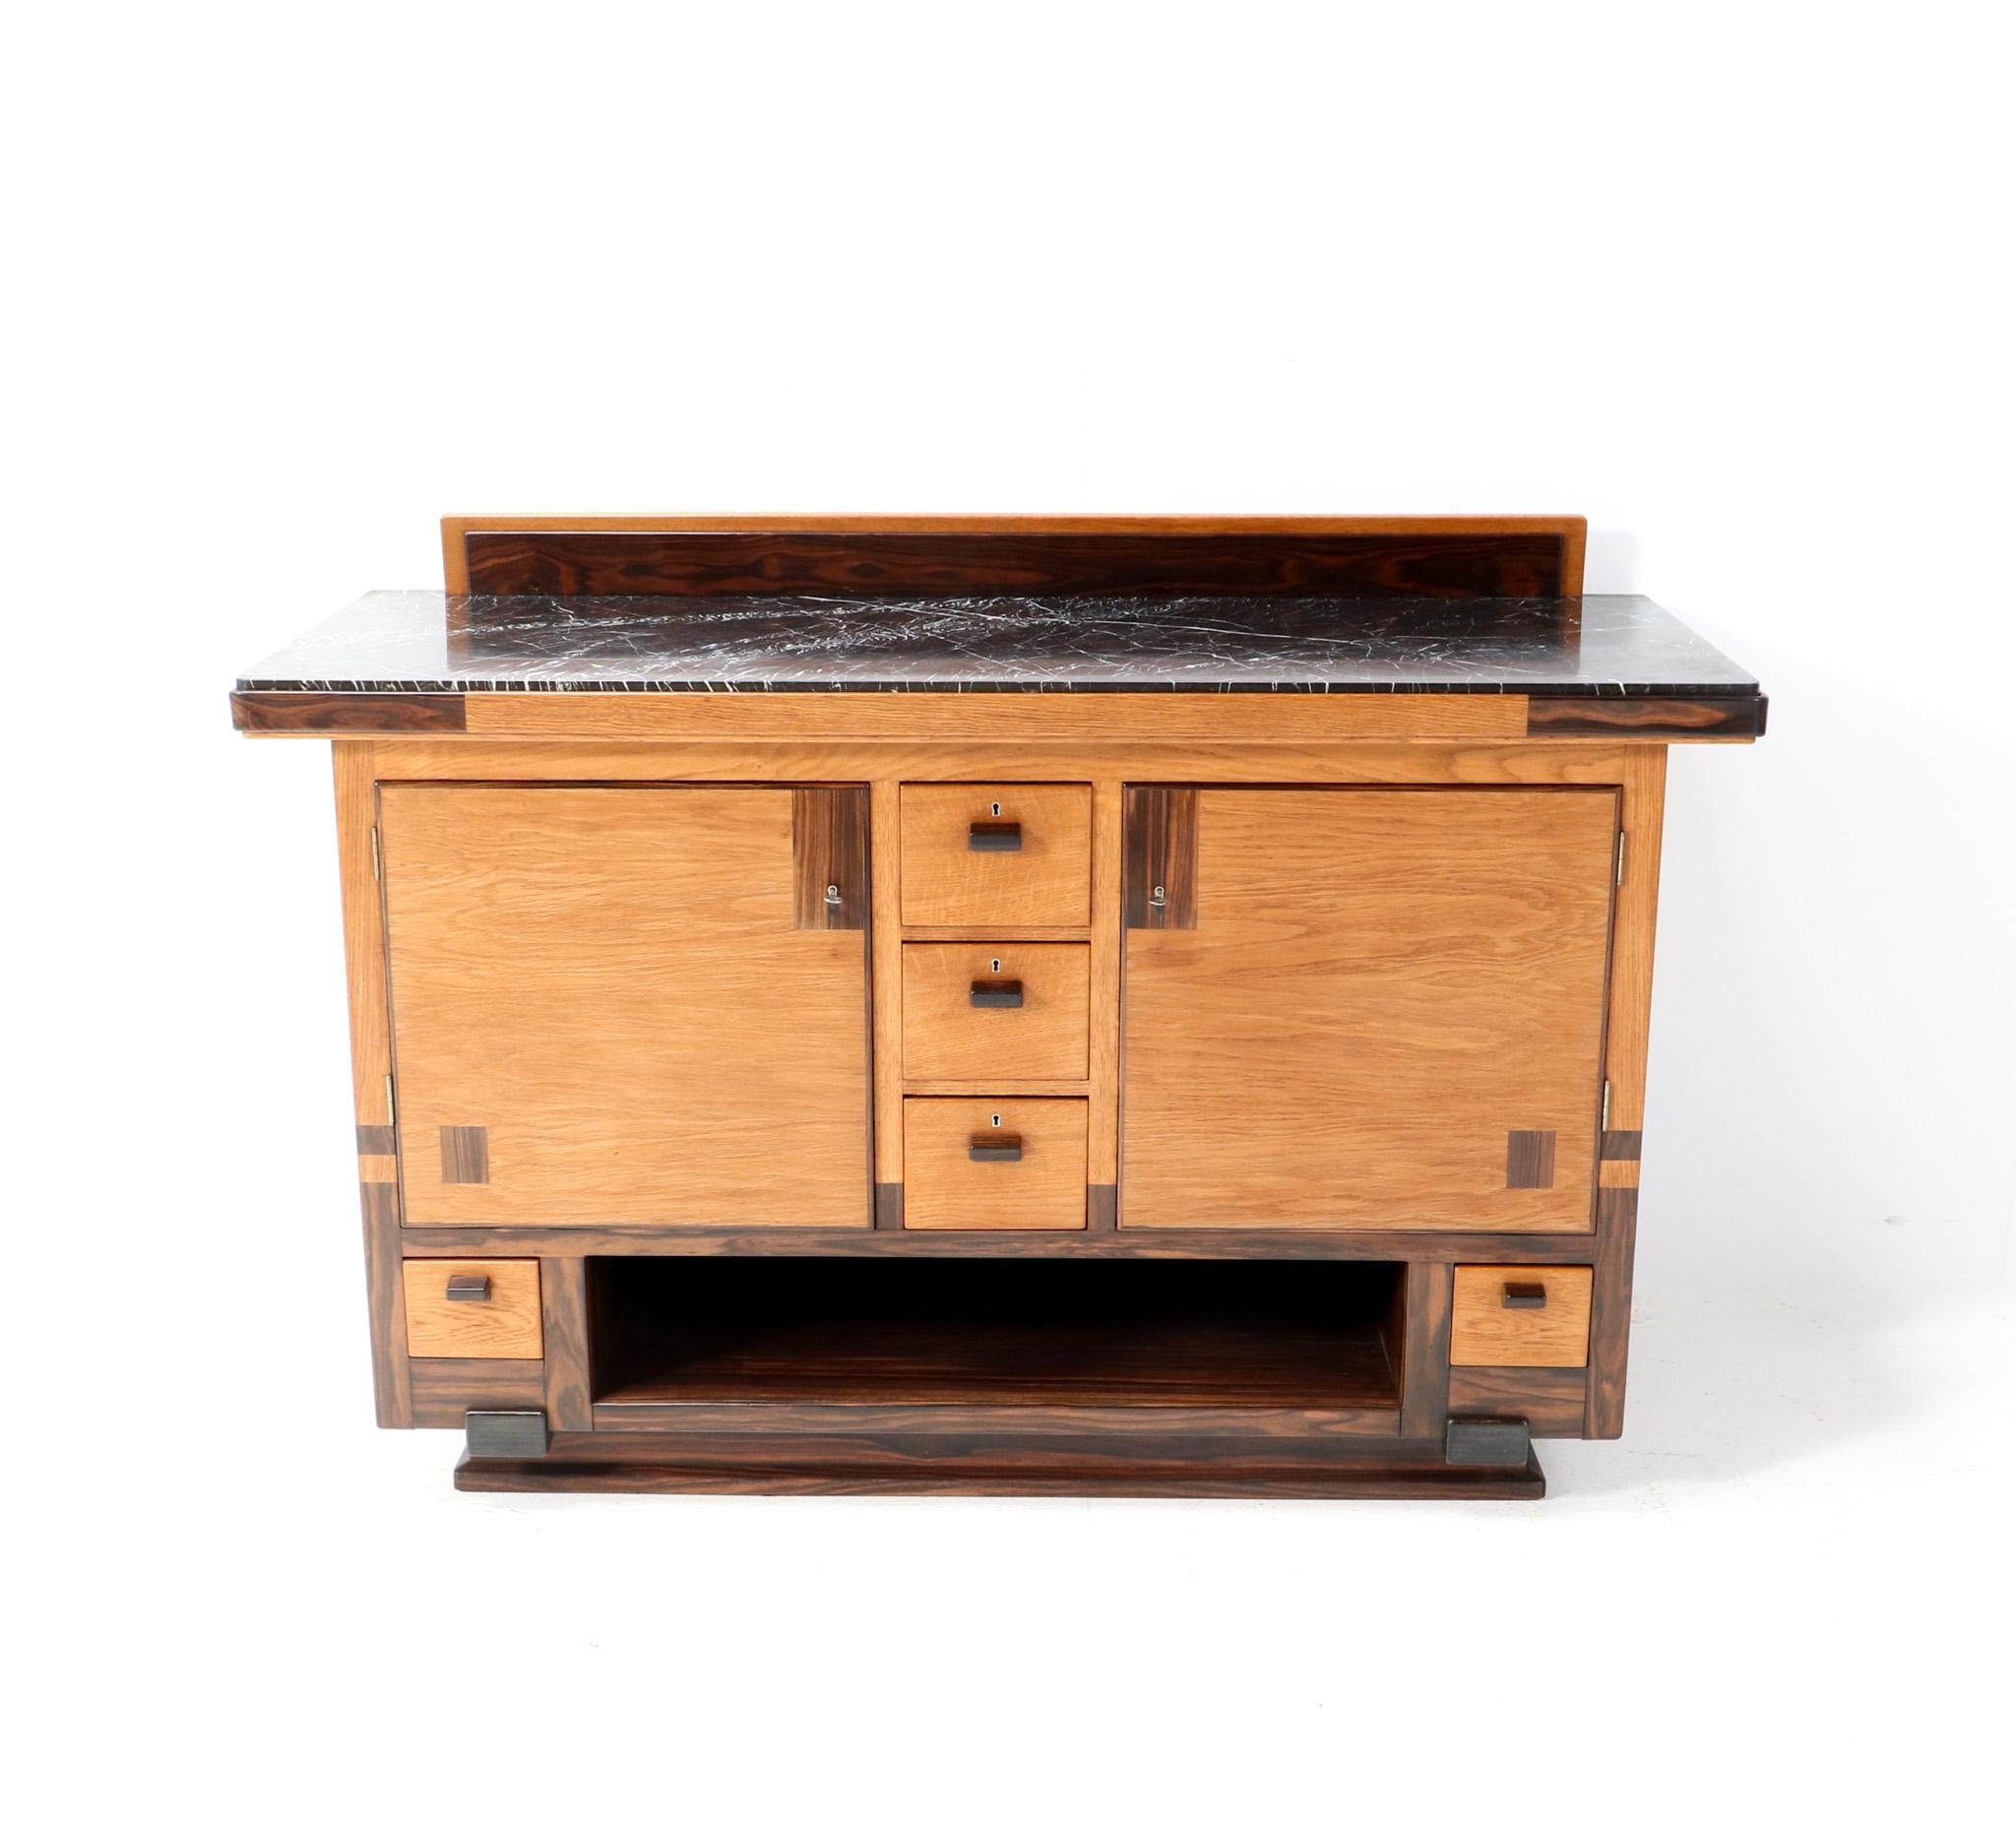 Magnificent and ultra rare Art Deco Modernist credenza or sideboard. Design by Anton Lucas Leiden. Striking Dutch design from the 1920s. Solid oak base with original oak and macassar ebony veneered doors. Five drawers with original solid macassar